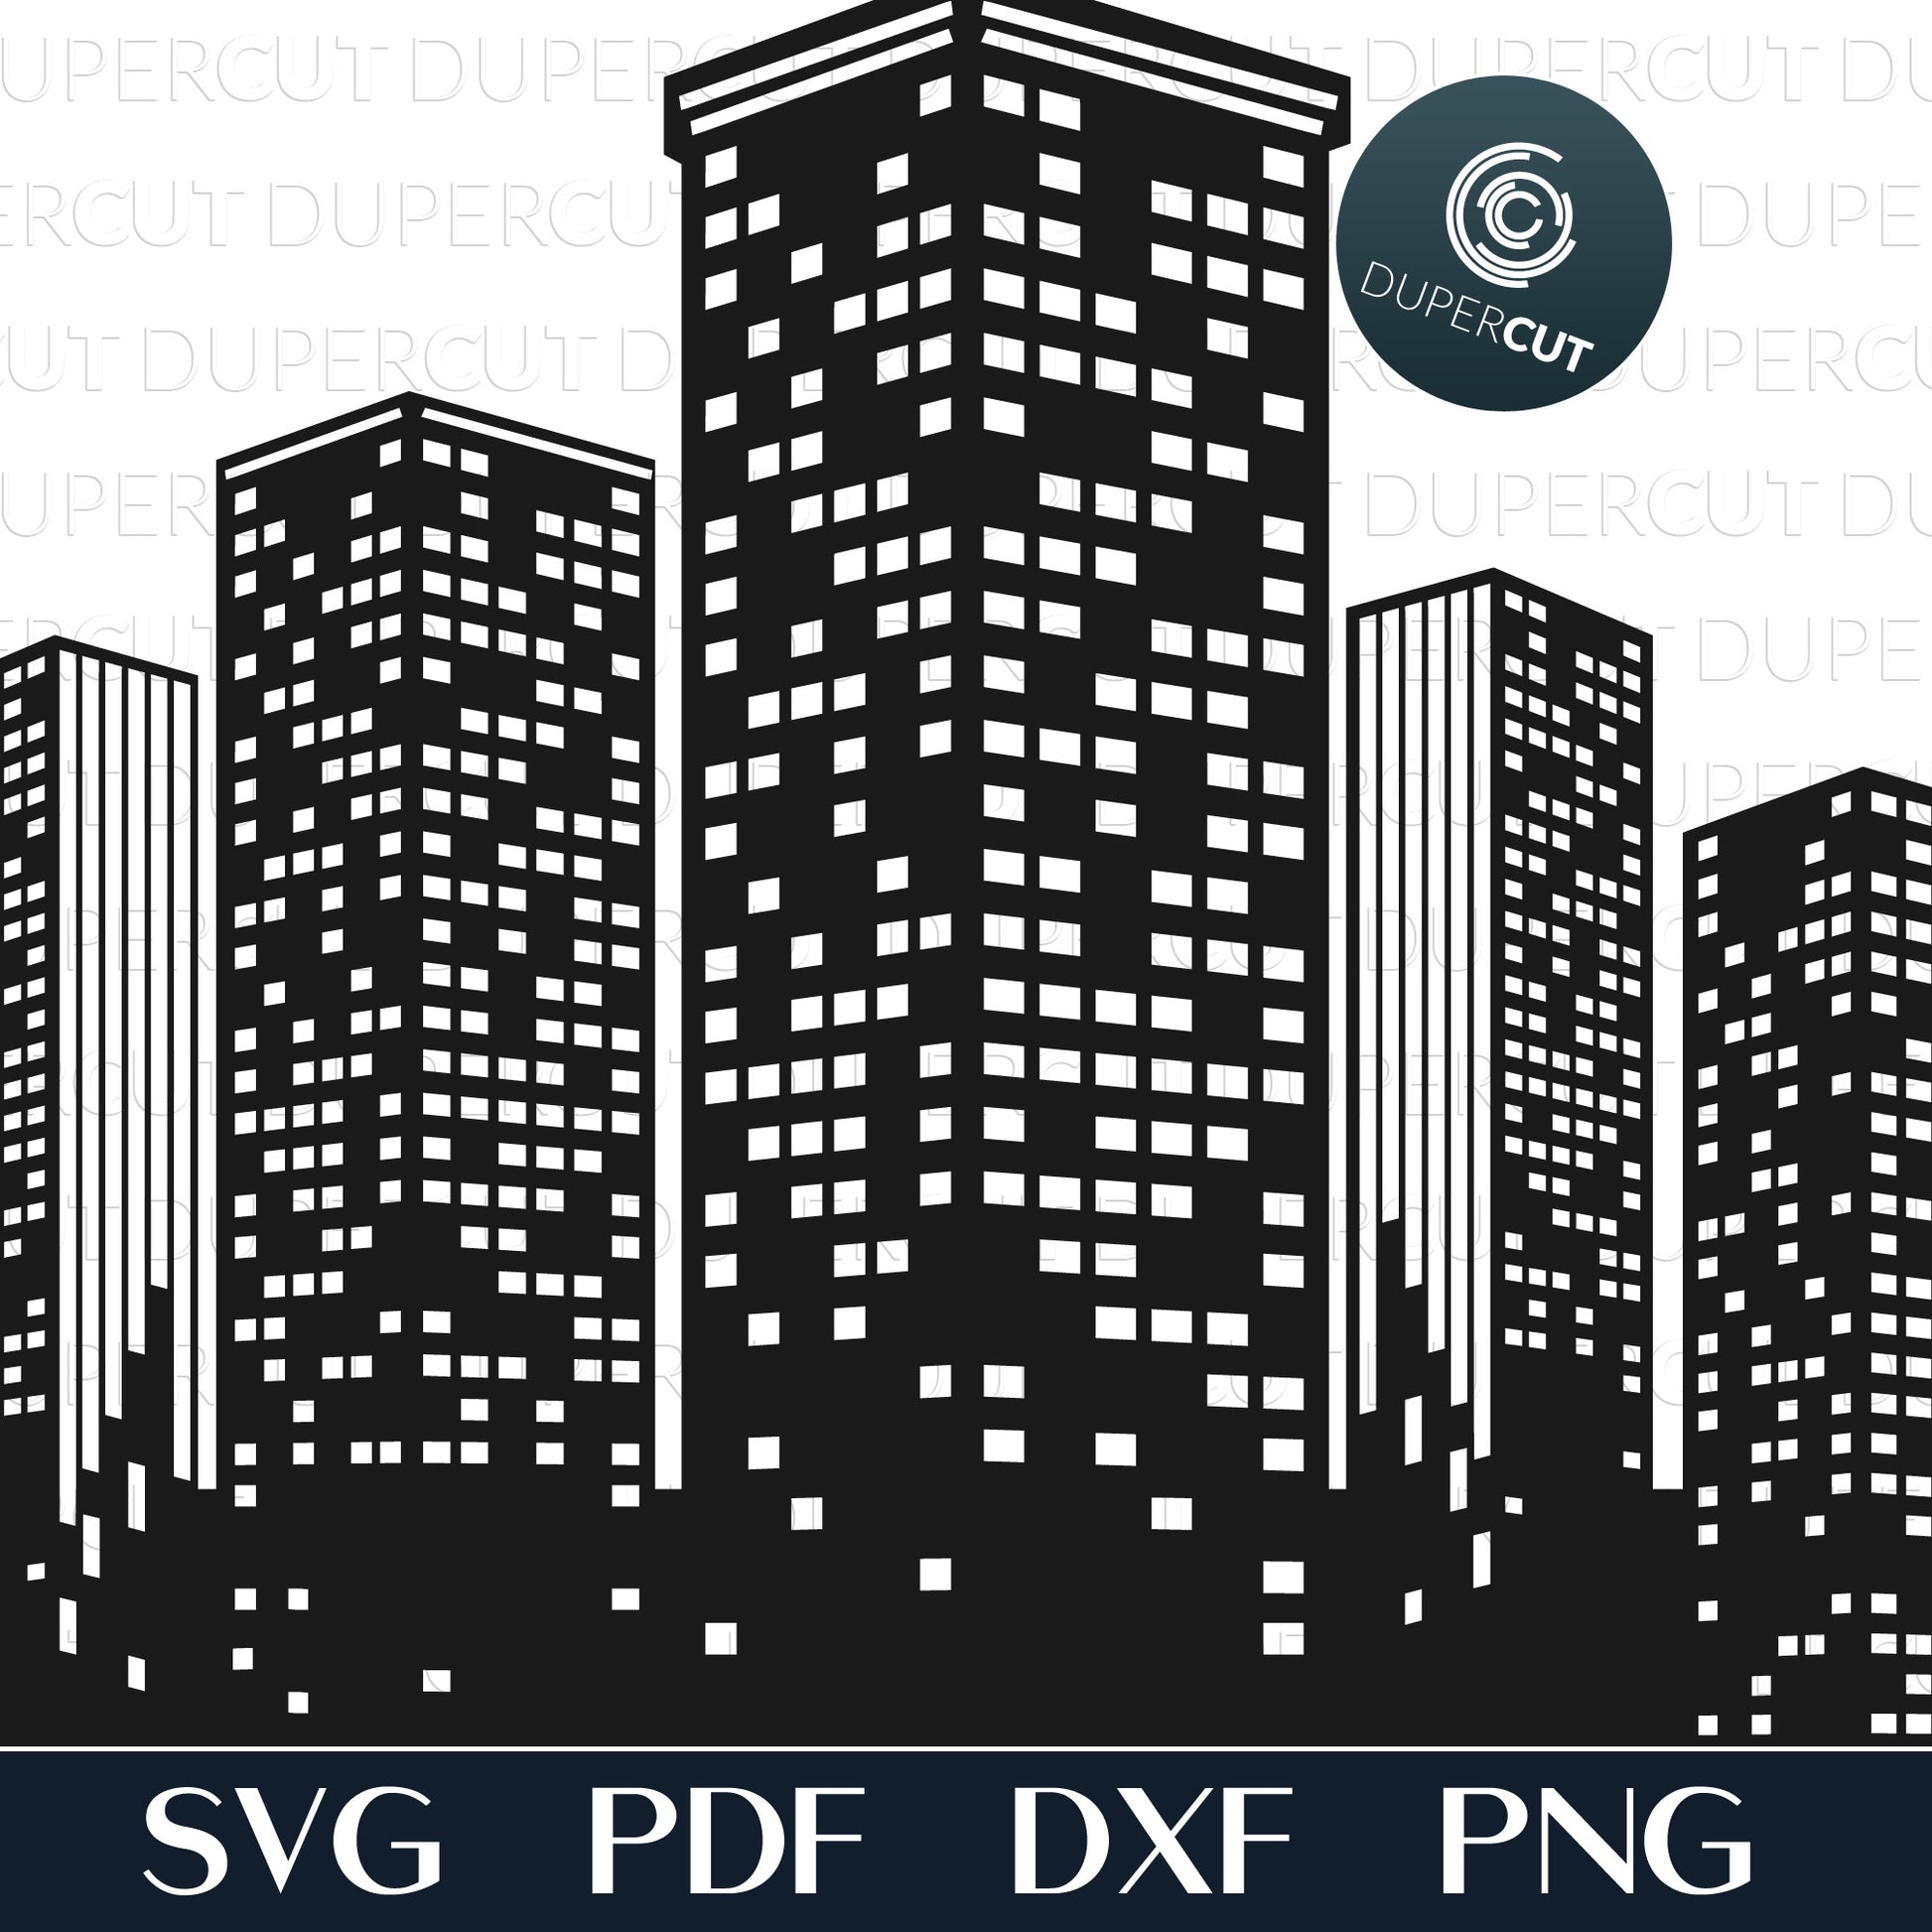 Night City skyline silhouette - layered cutting files - SVG PDF DXF vector template for Glowforge, Cricut, Silhouette Cameo, CNC plasma laser machines by DuperCut